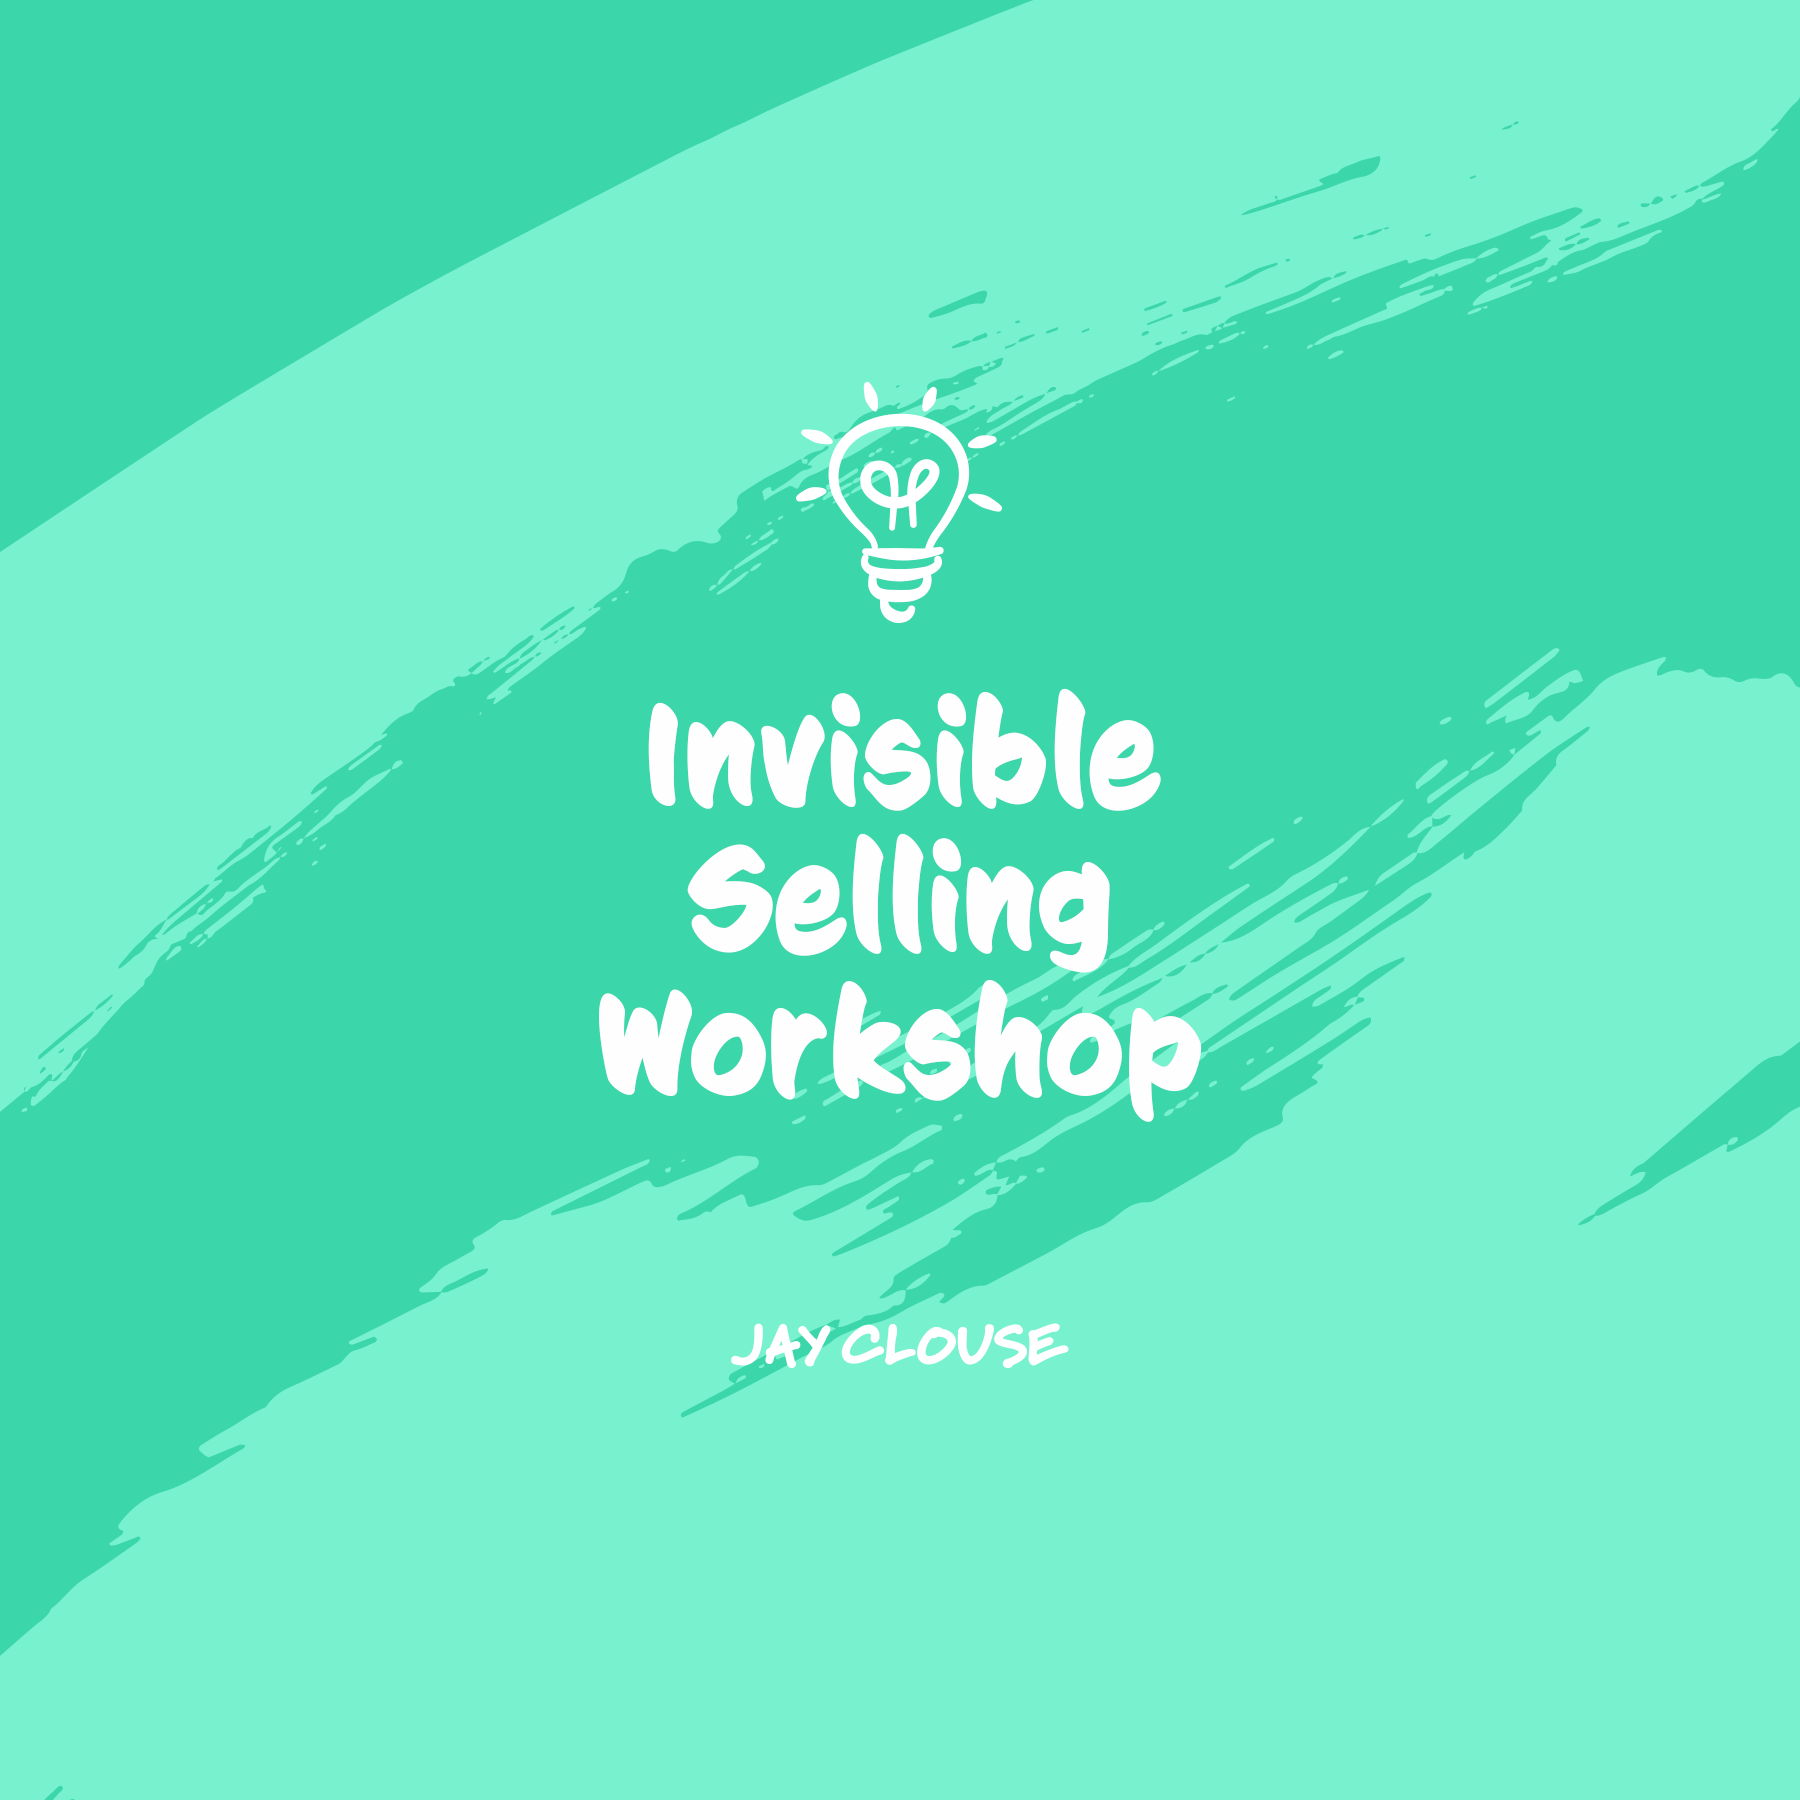 Invisible Selling Workshop